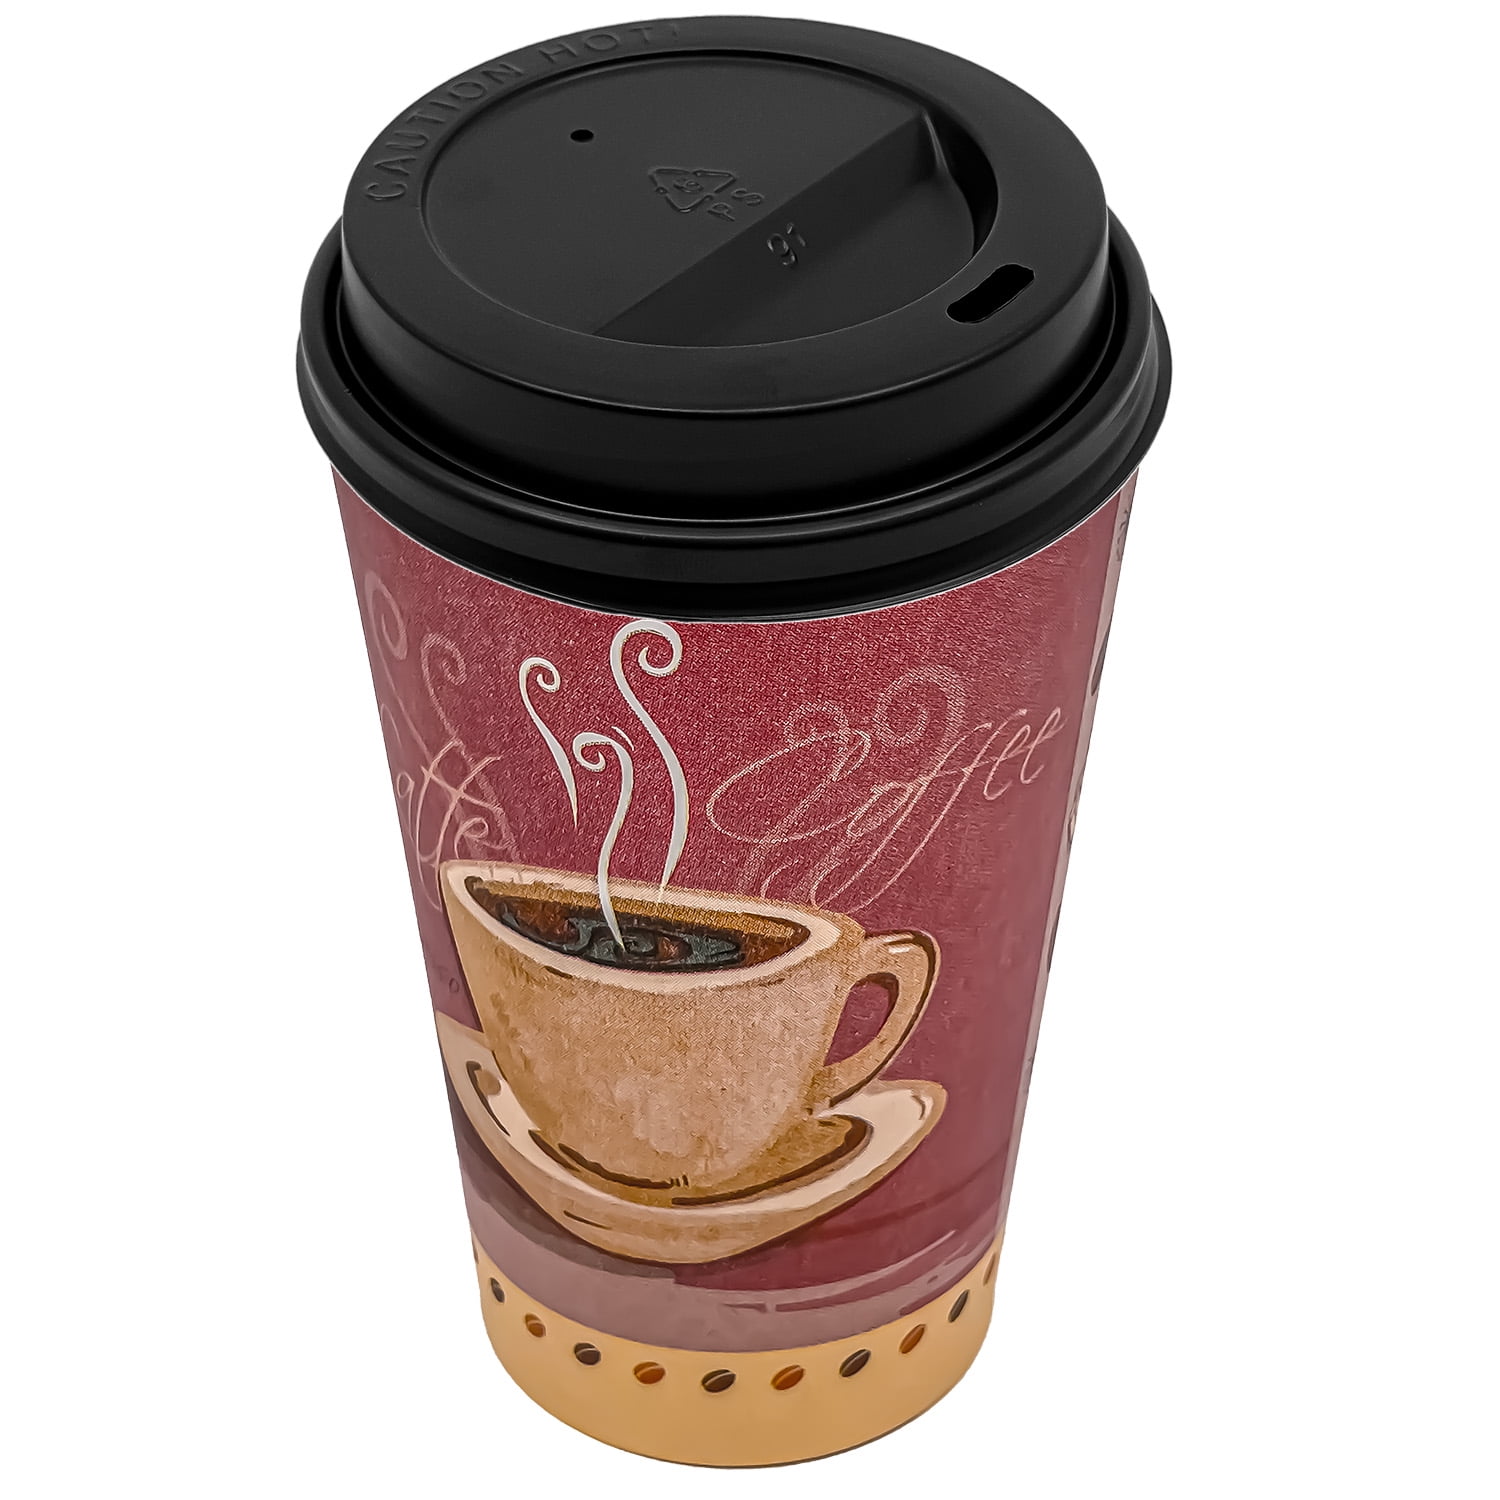 better latte than never to-go coffee cups (set of 10) – Packed Party